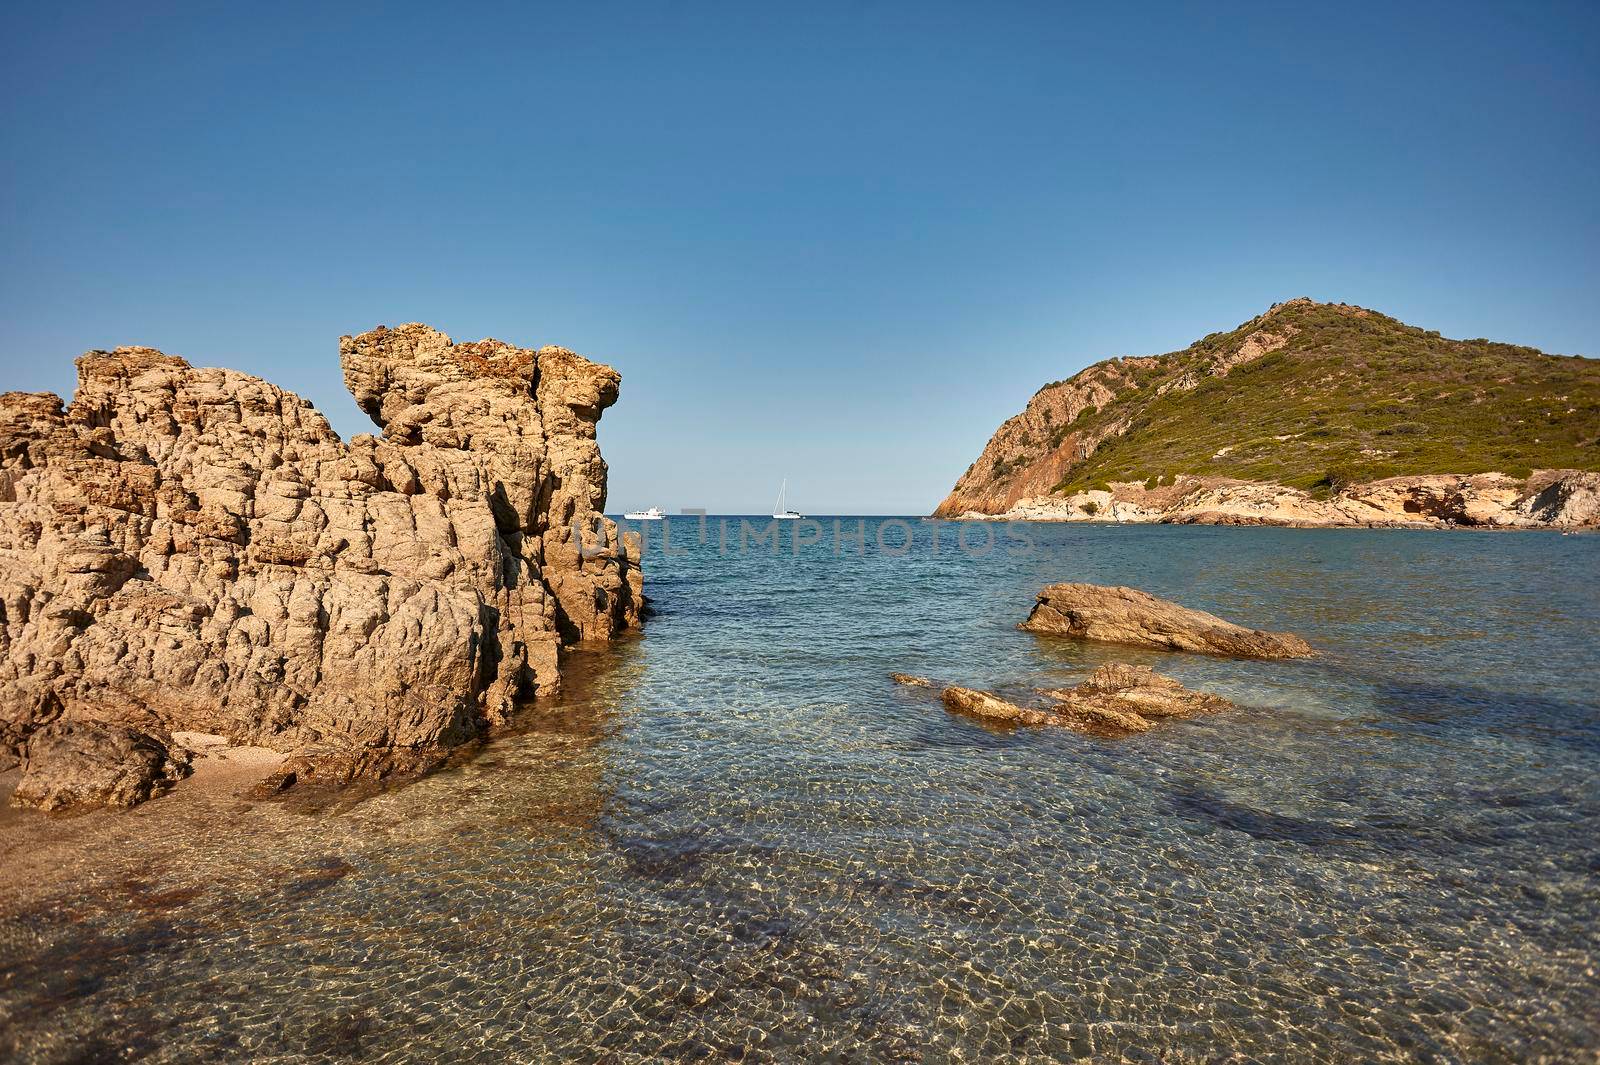 Panorama of rocks escaping from the water in Cala Sa Figu beach in Sardinia, Italy.